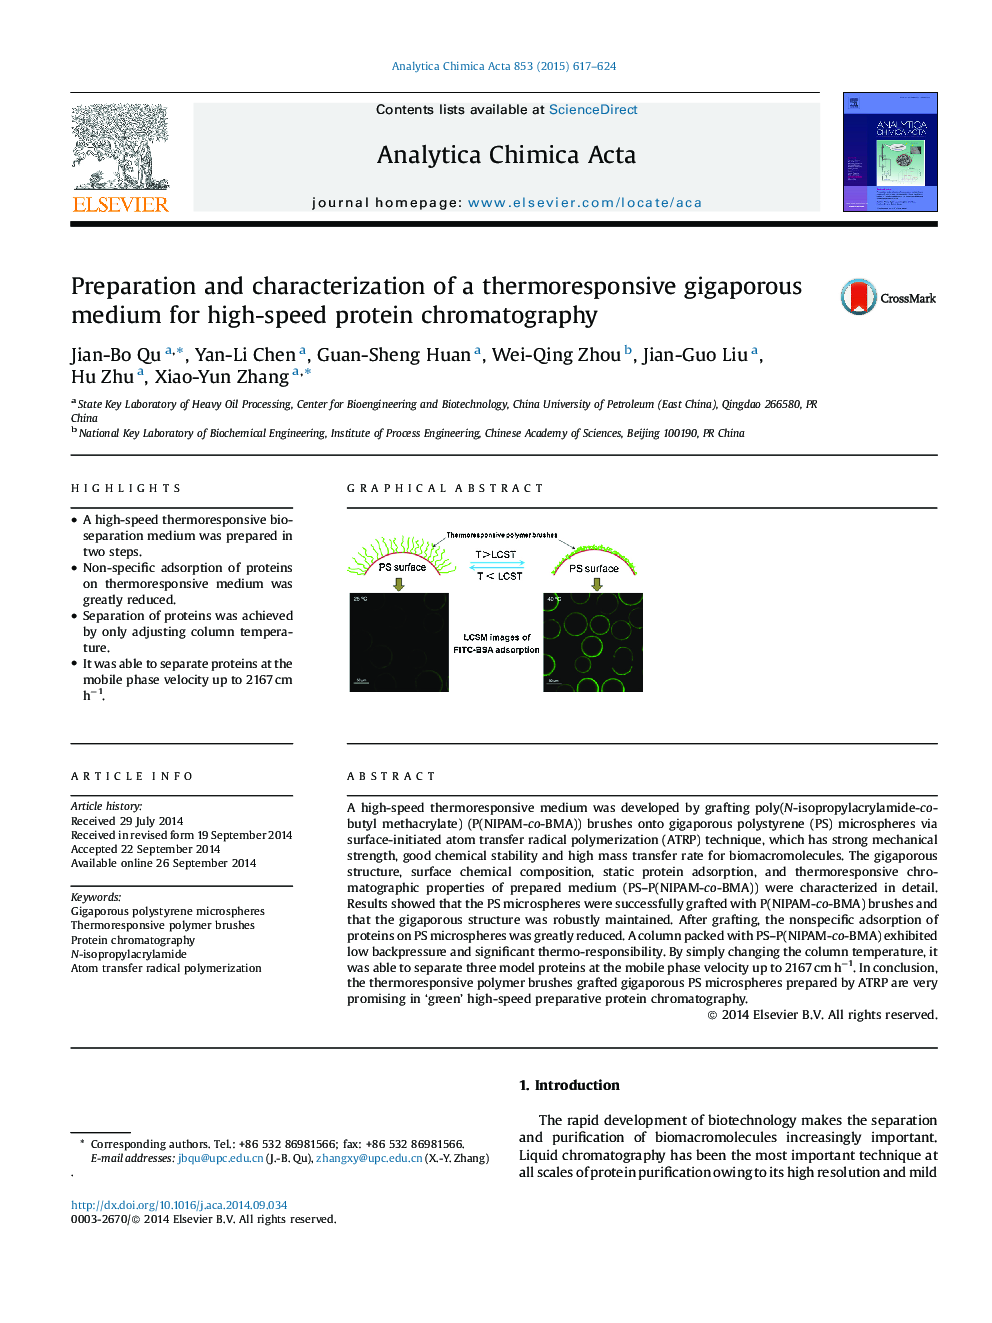 Preparation and characterization of a thermoresponsive gigaporous medium for high-speed protein chromatography